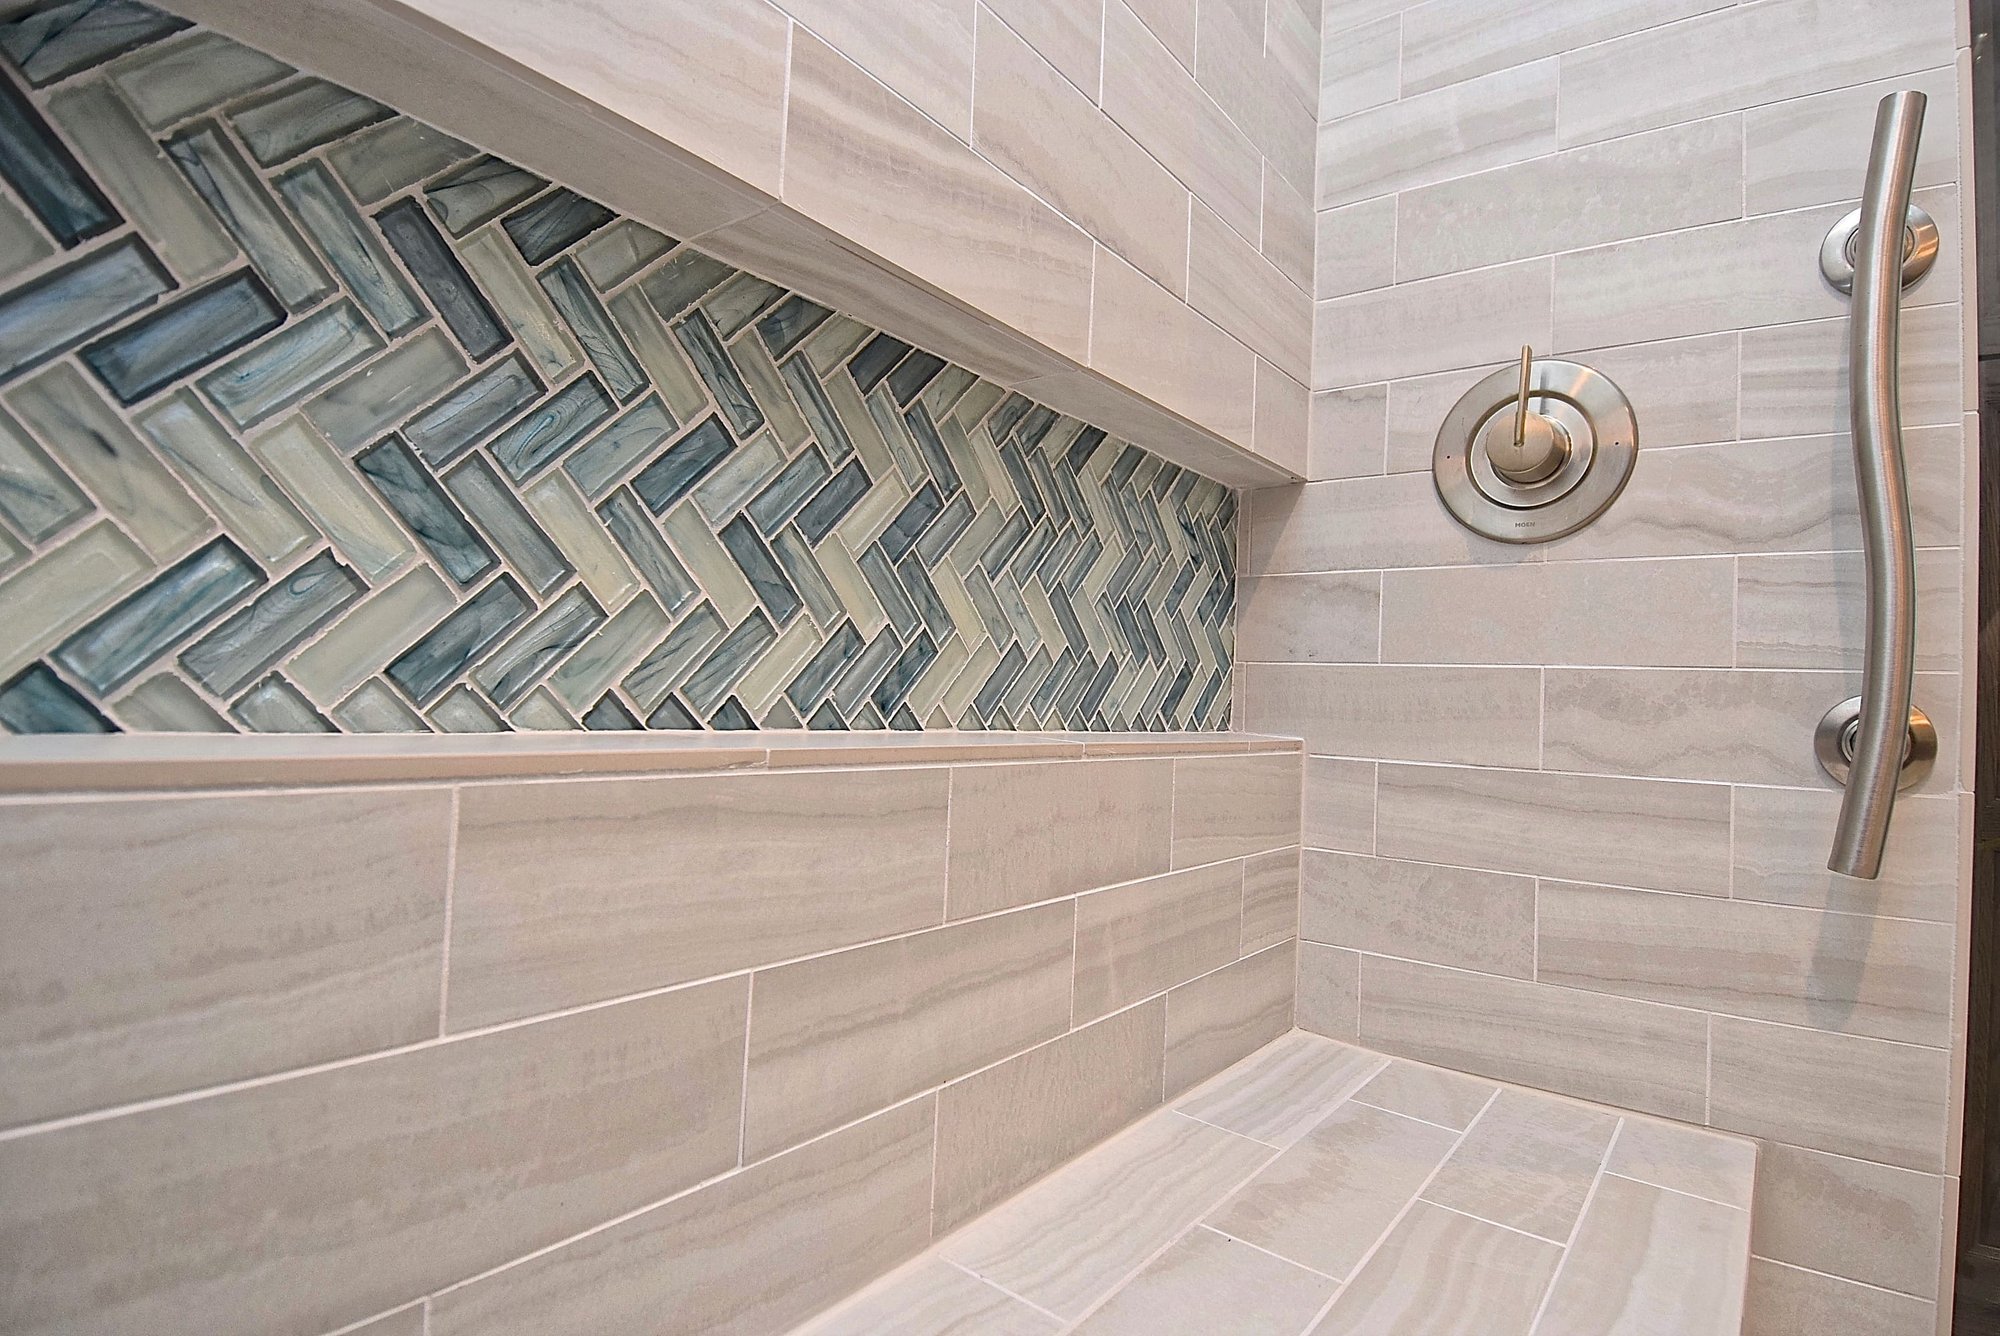 Shower Bench and Grab Bar in ADA Bathroom Renovation with Blue Herringbone Accent Tile in Niche